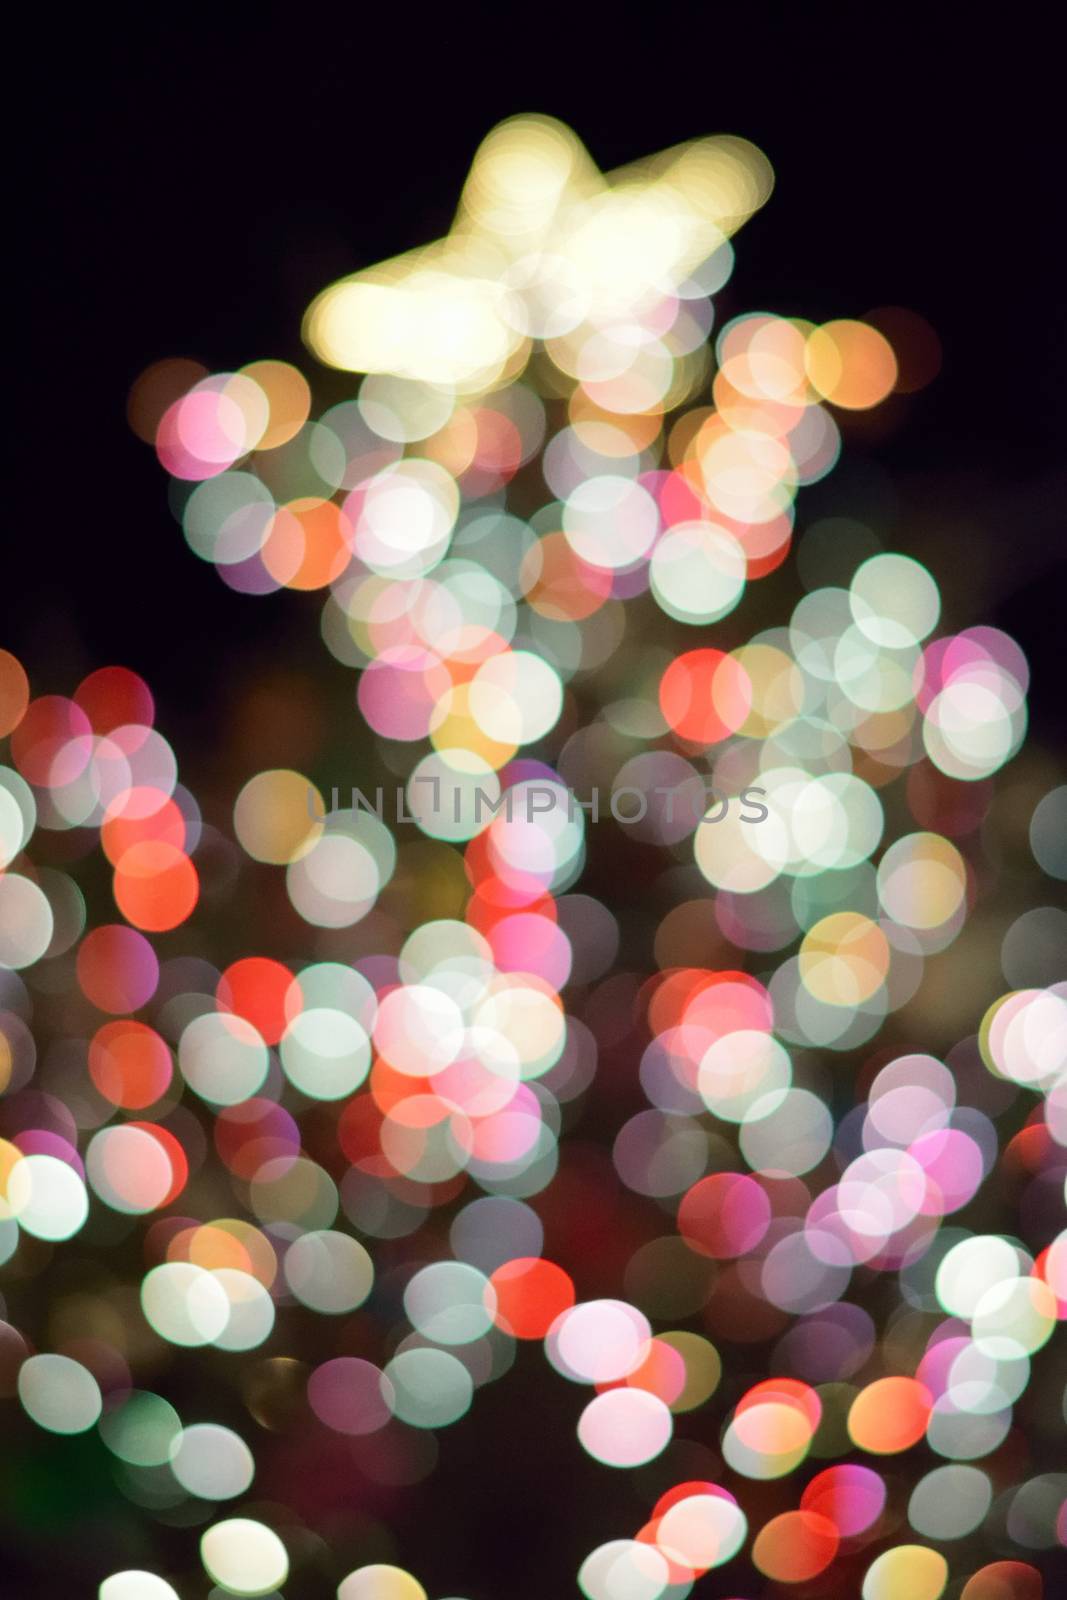 Abstract texture of colorful Christmas lights background blurs in vertical frame